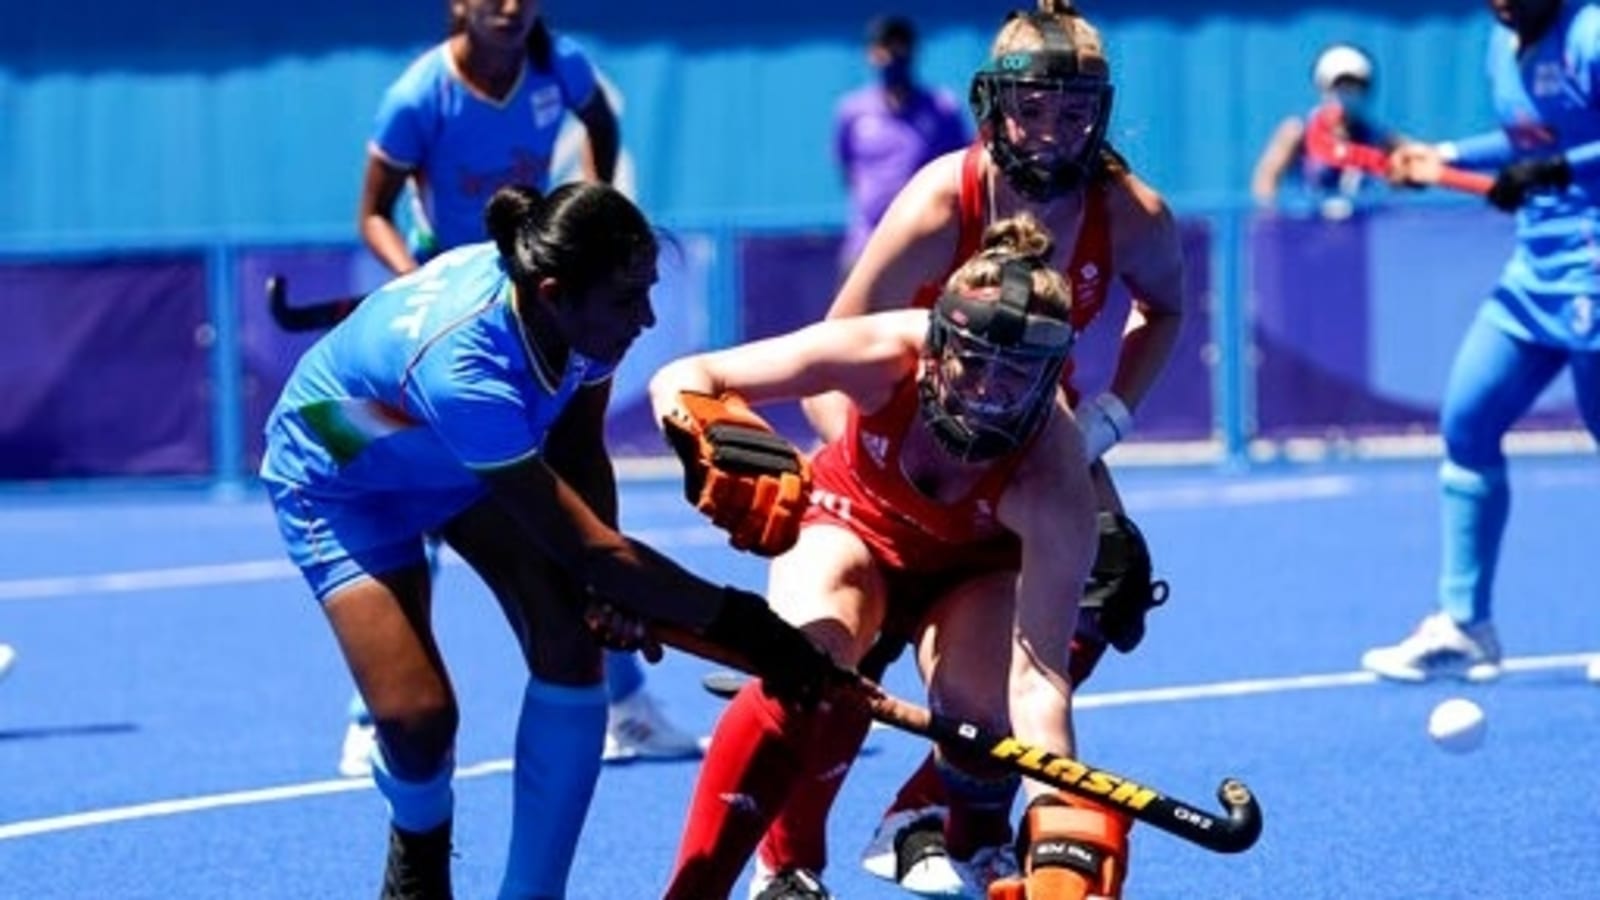 Tokyo 2020: Indian women lose to Argentina in hockey, to play for bronze, Live updates, Tokyo 2020 News